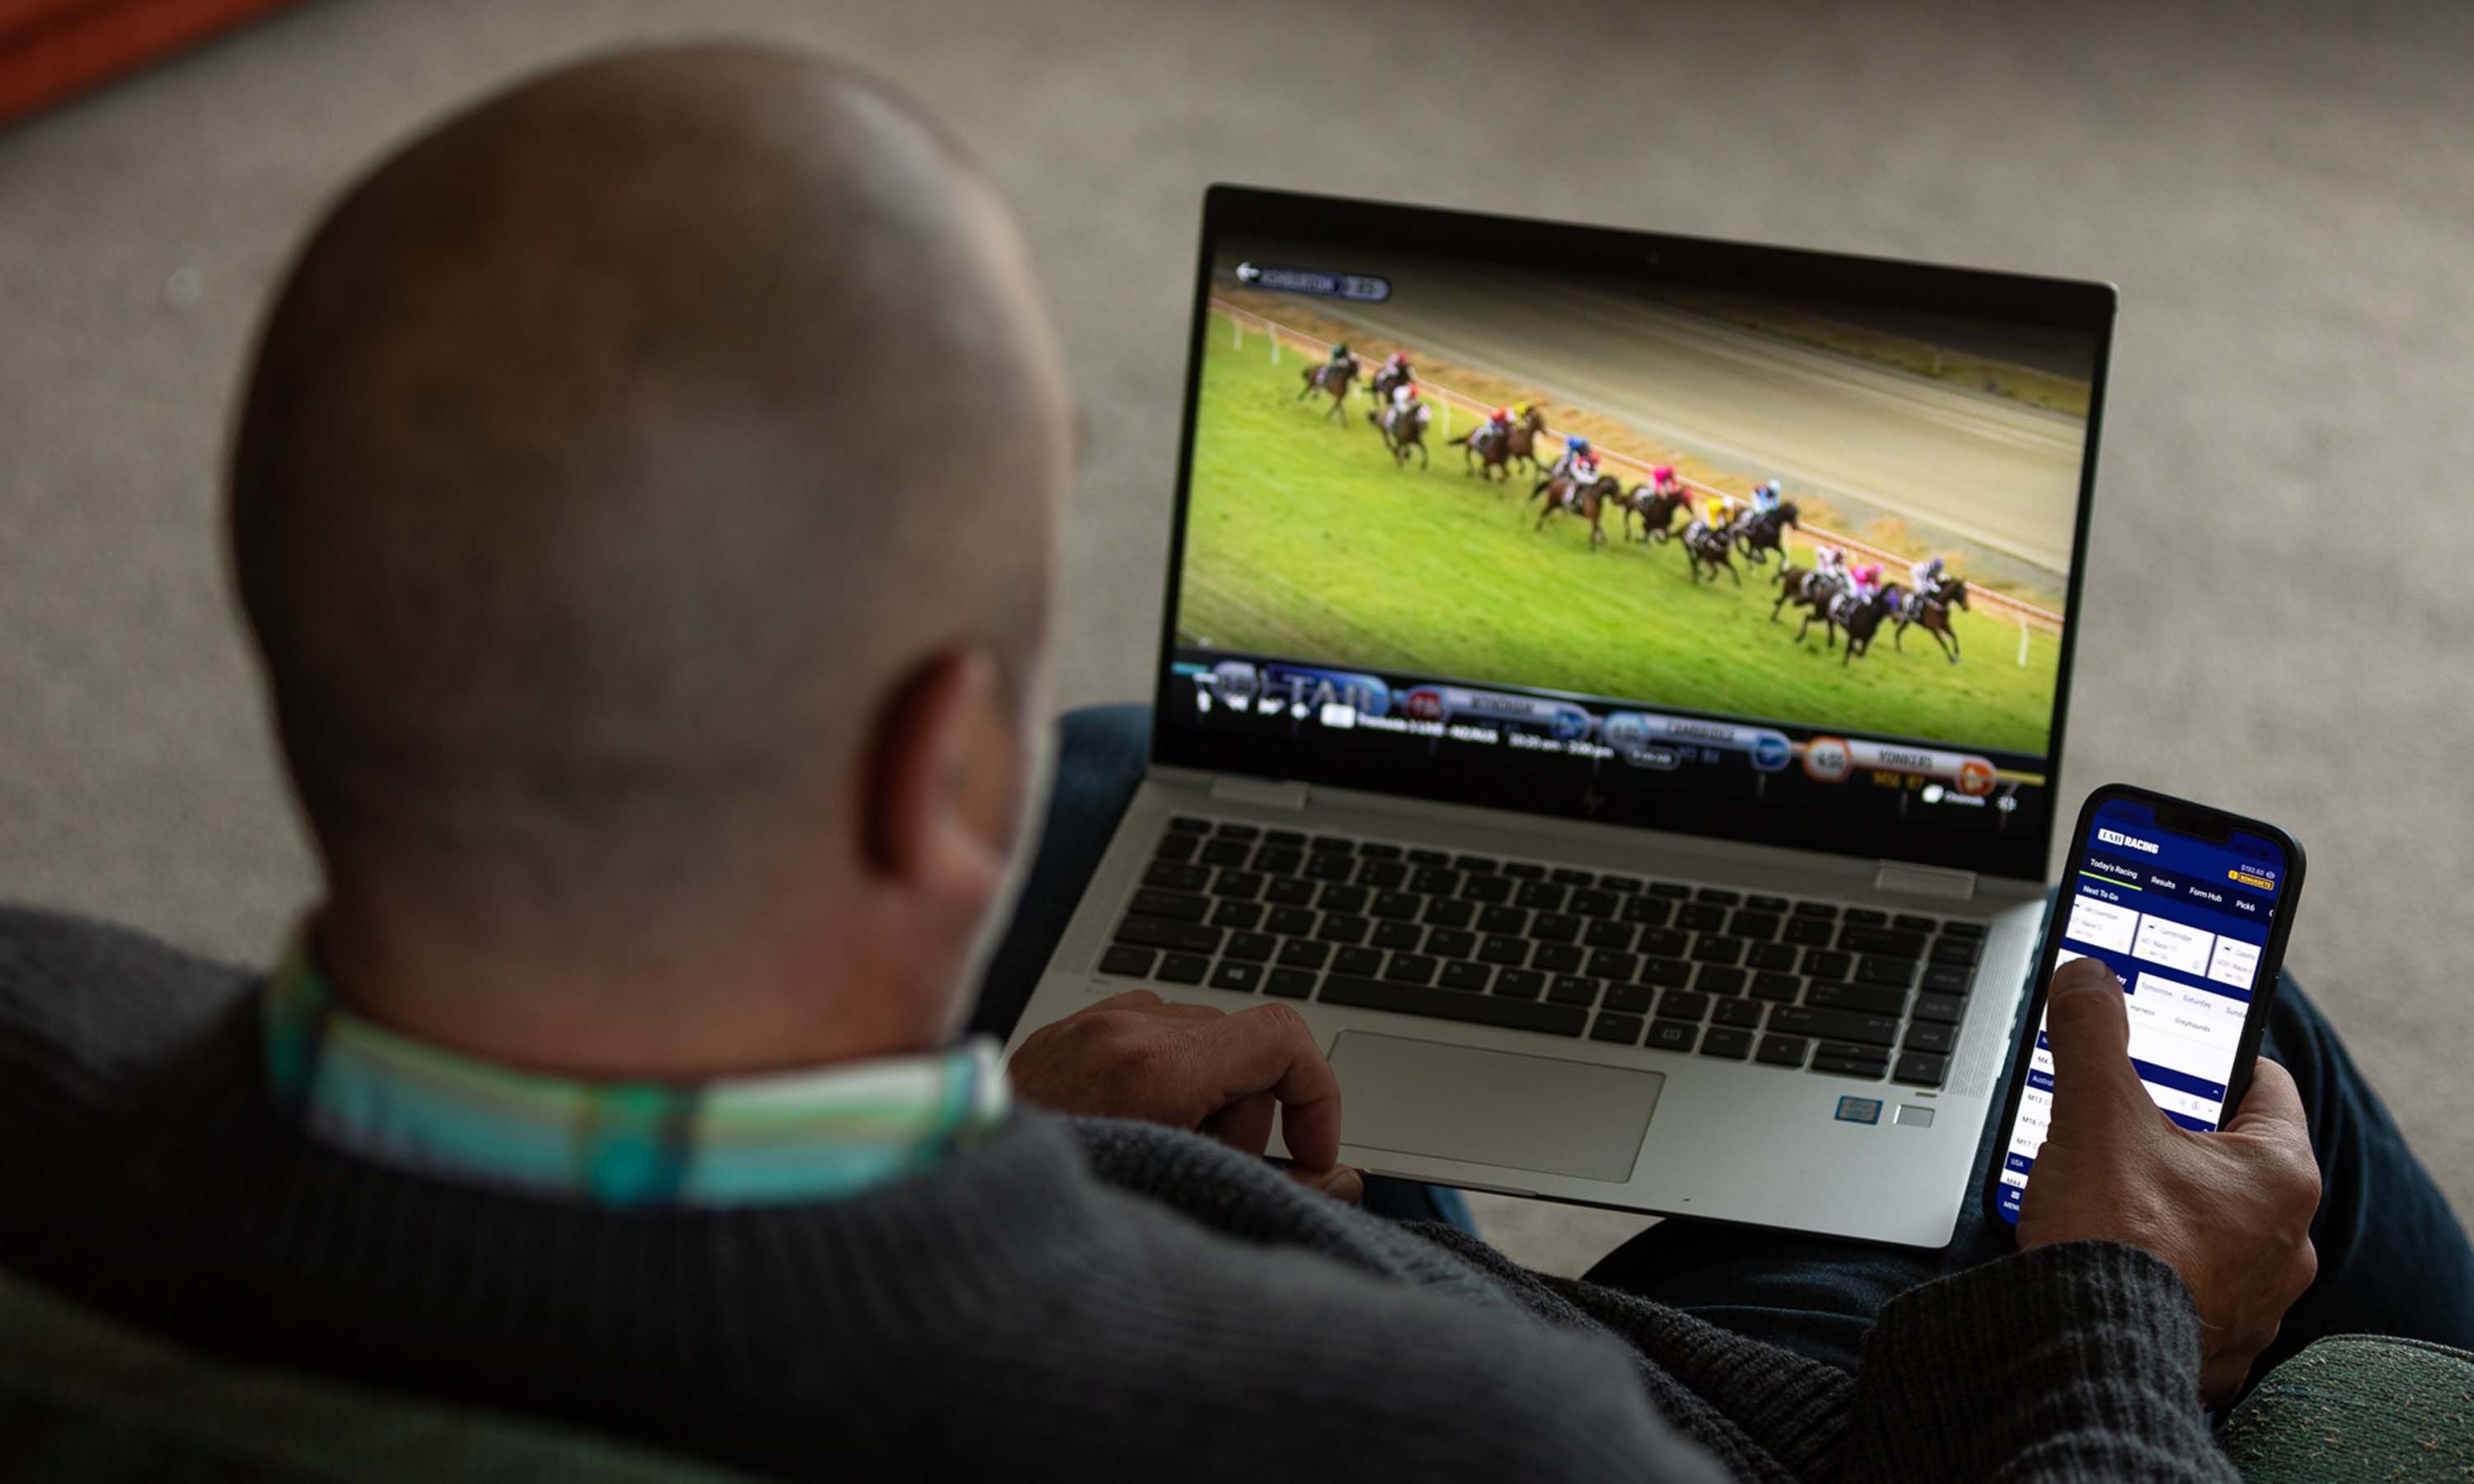 Man watching horse races on laptop while placing bets on phone